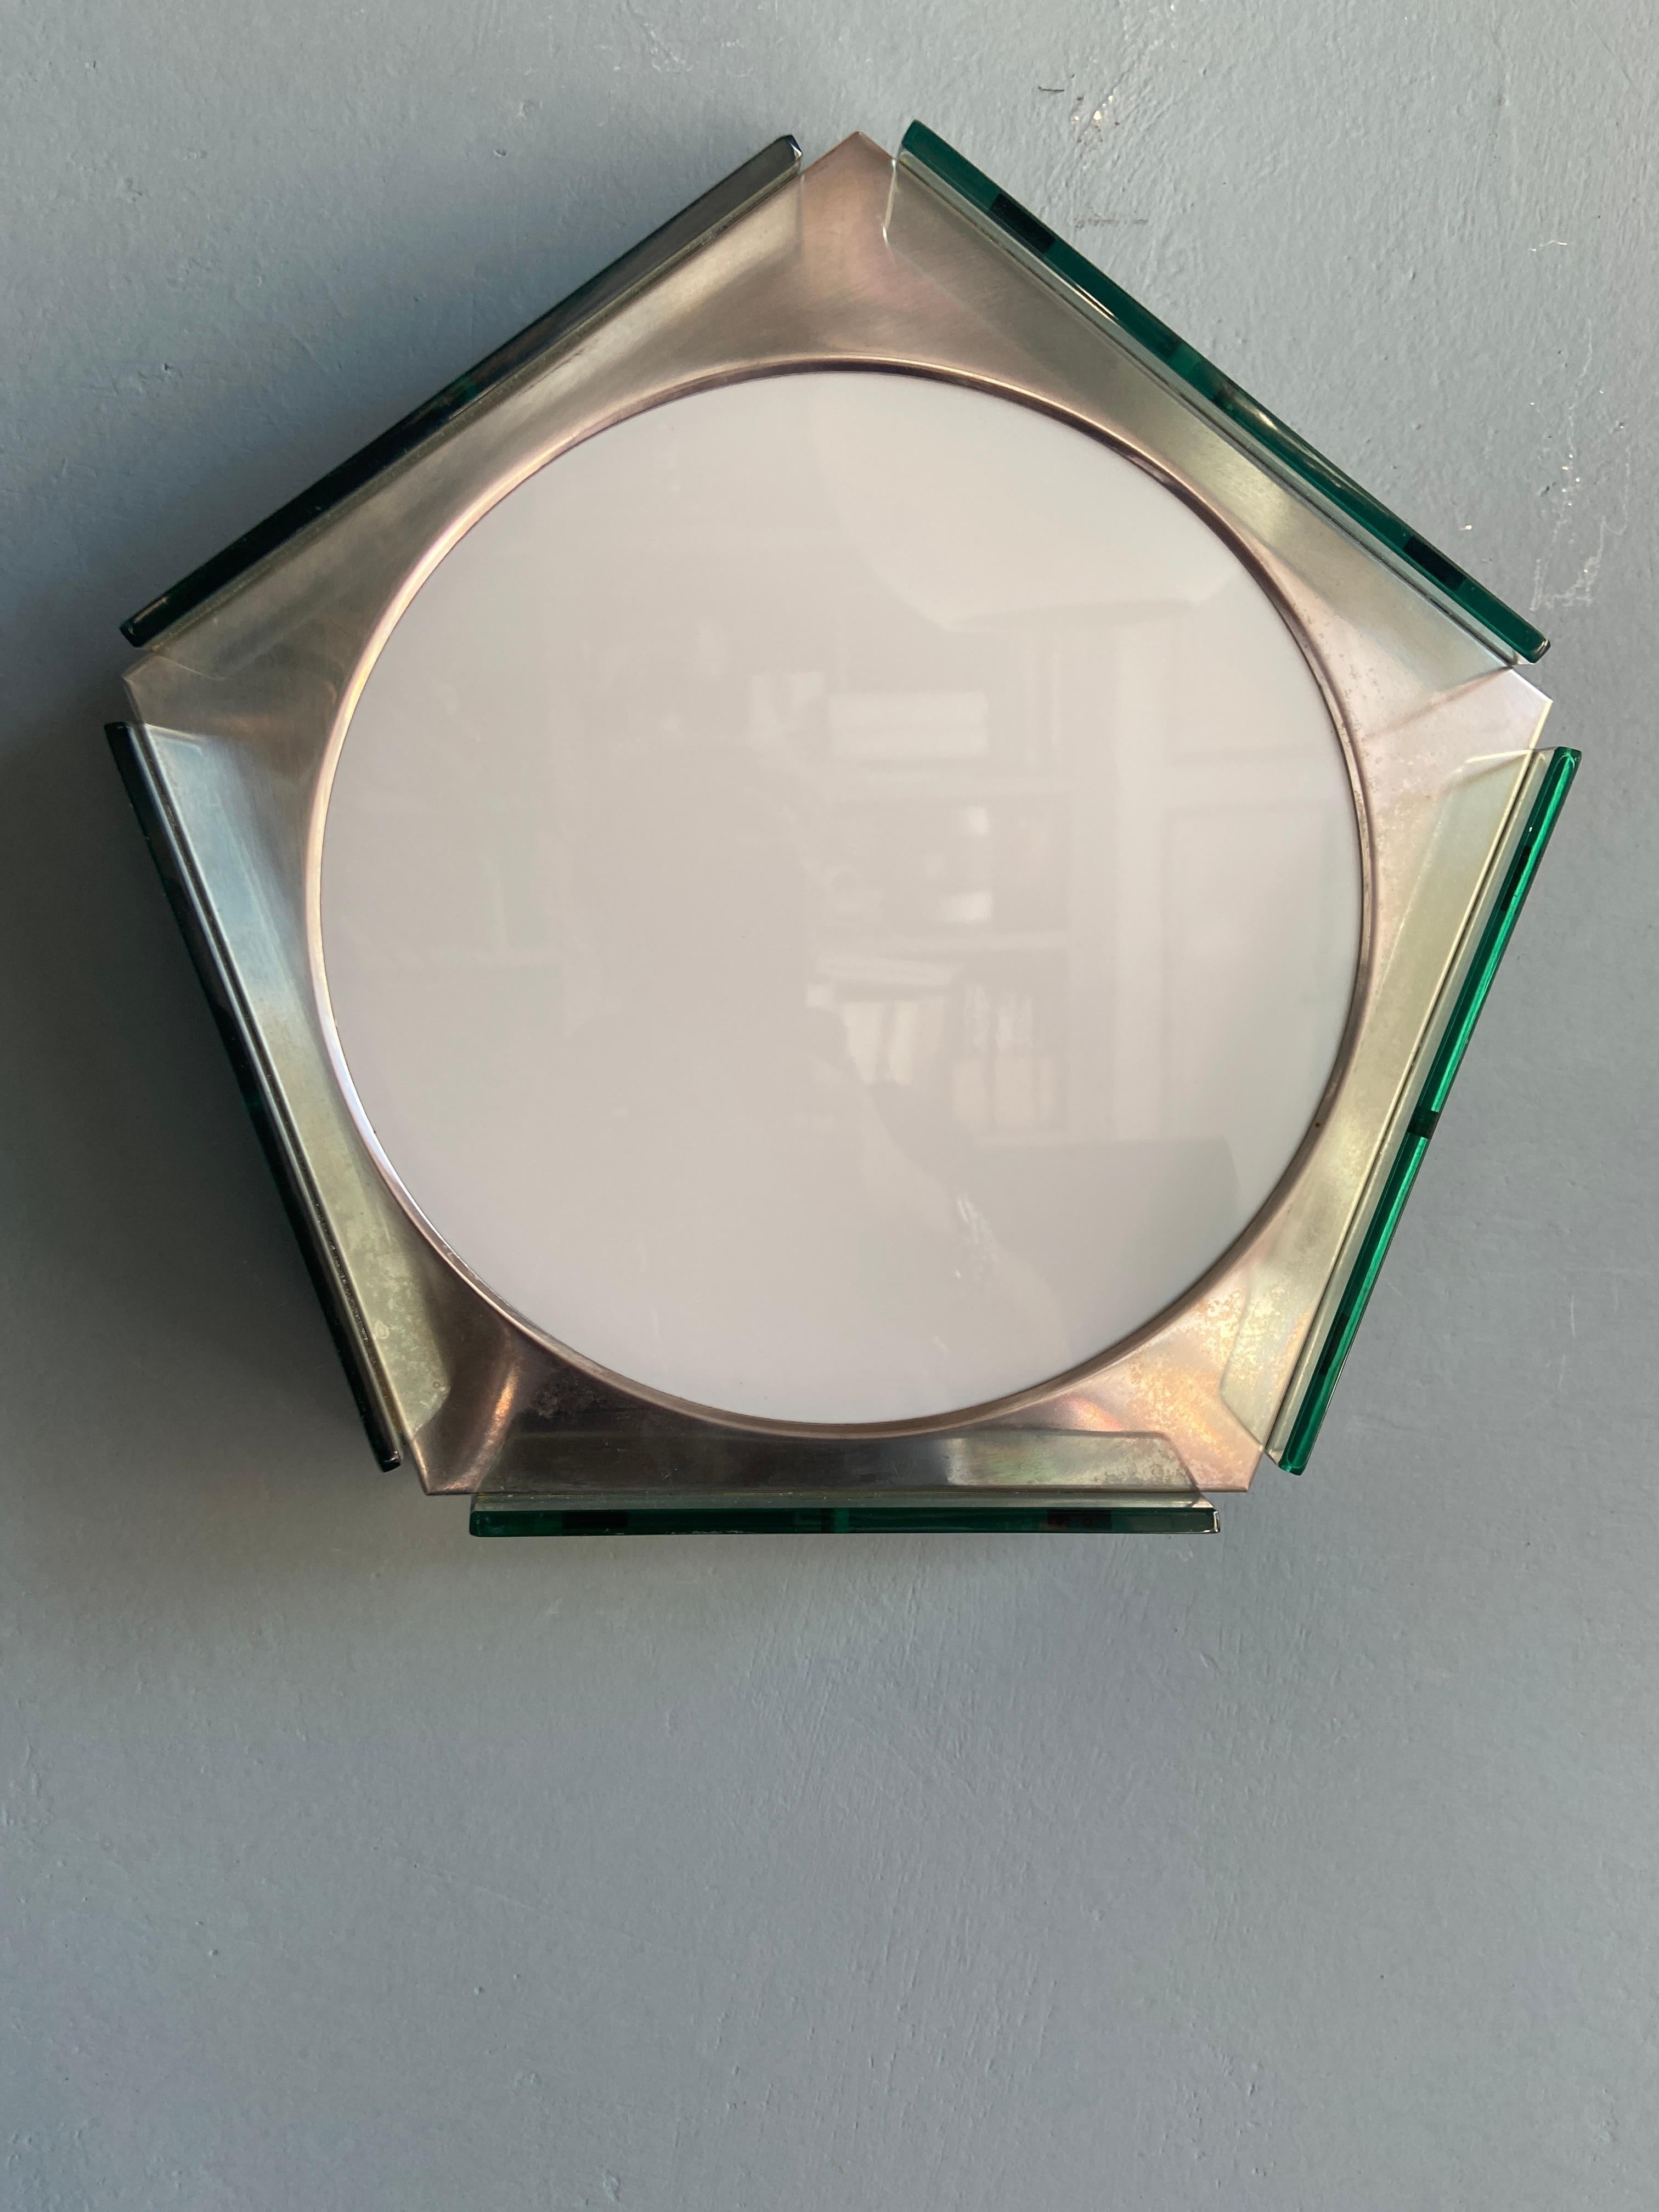 Mid-Century Modern Italian Three-light wall lamp in stainless steel with opaline and green colored glasses.
The electrical system was completely replaced along with the lamp holders